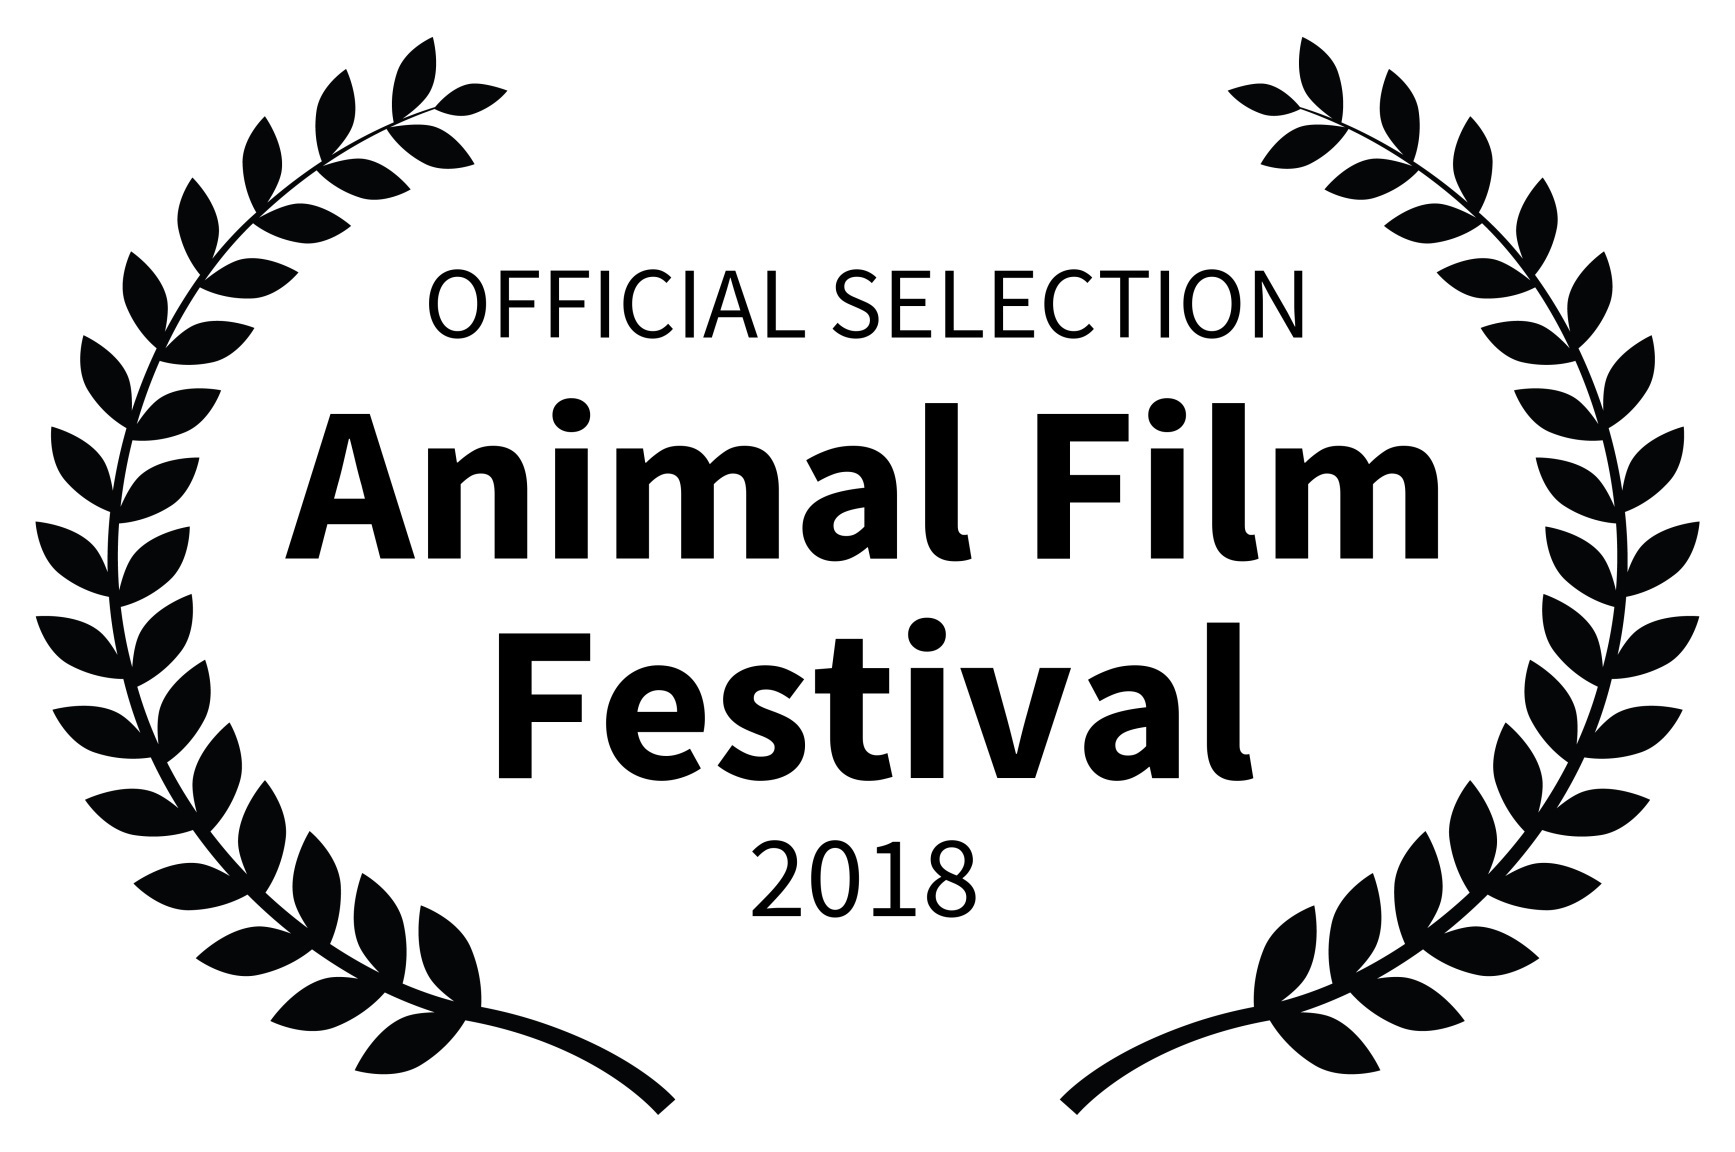 Official selection Animal Film Festival 2018